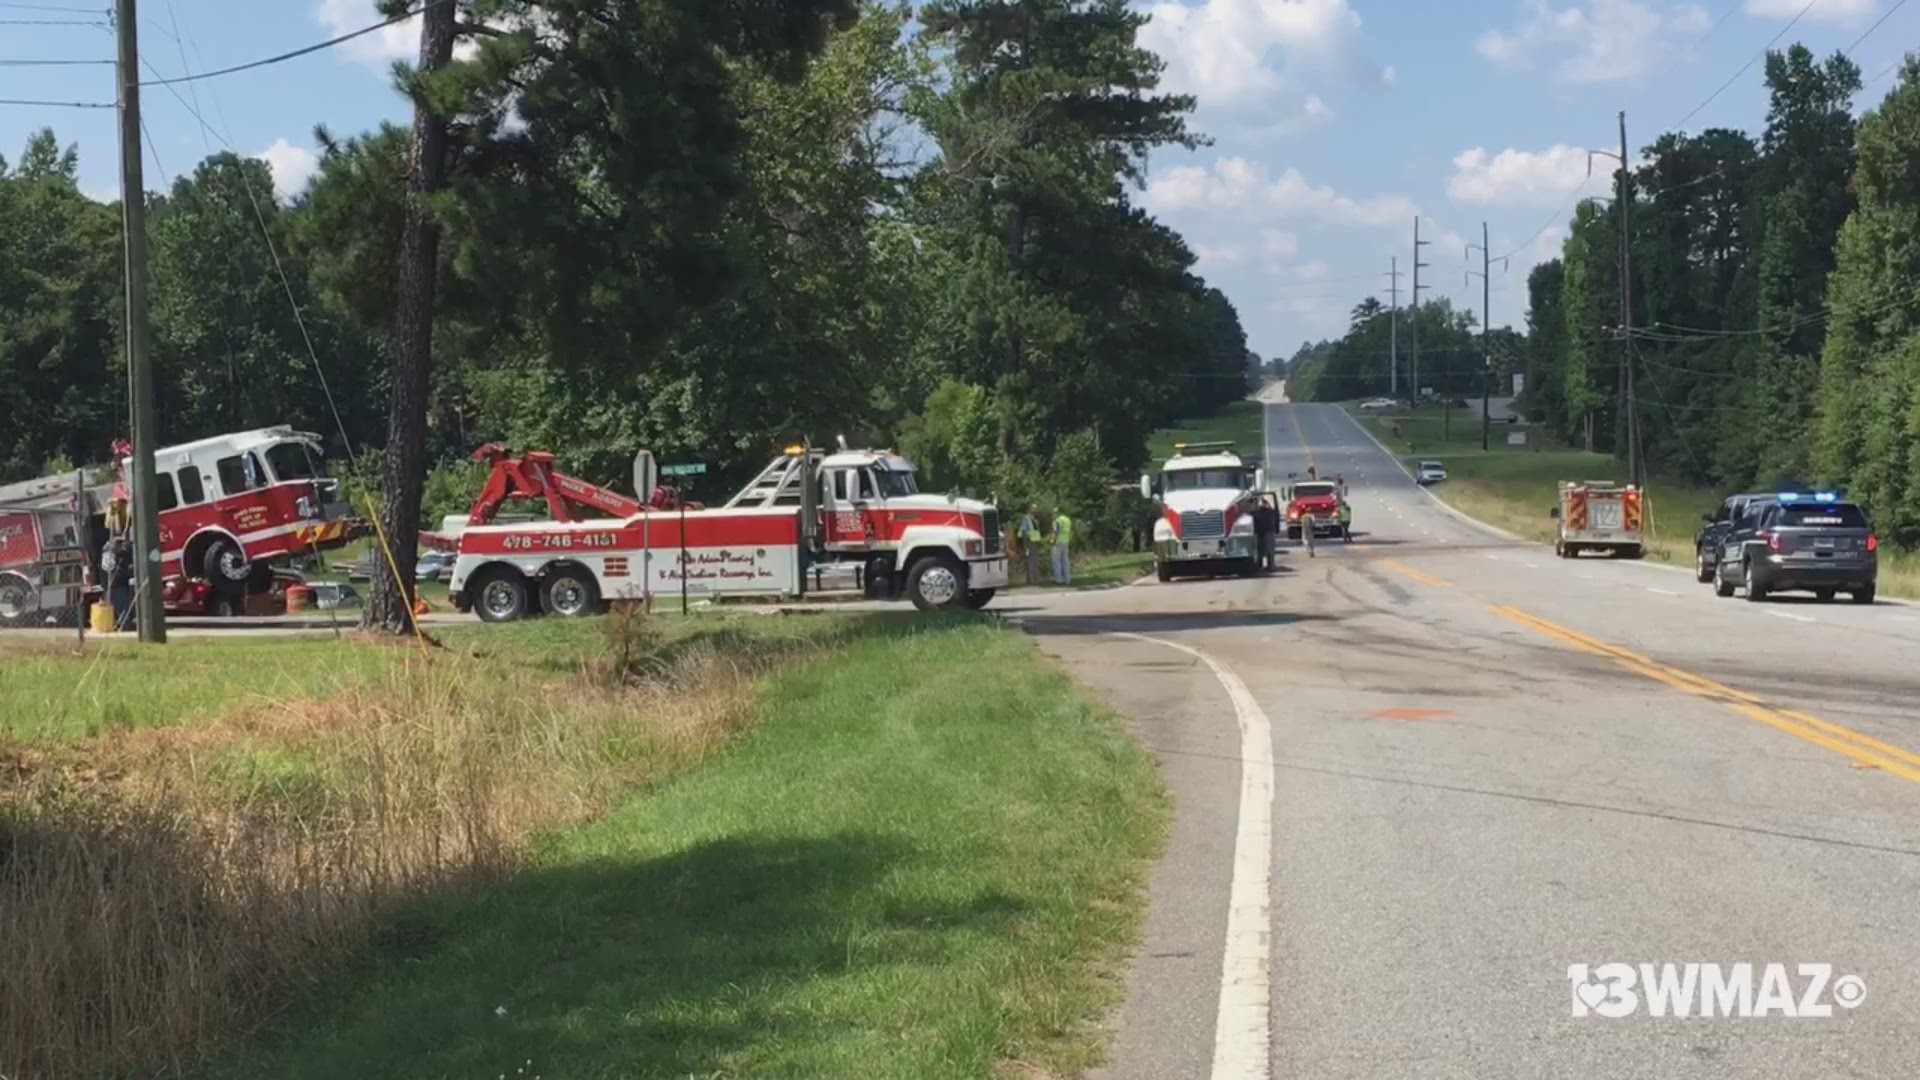 A man was killed Tuesday in an accident with a head-on collision involving a fire truck on Highway 49 in Jones County